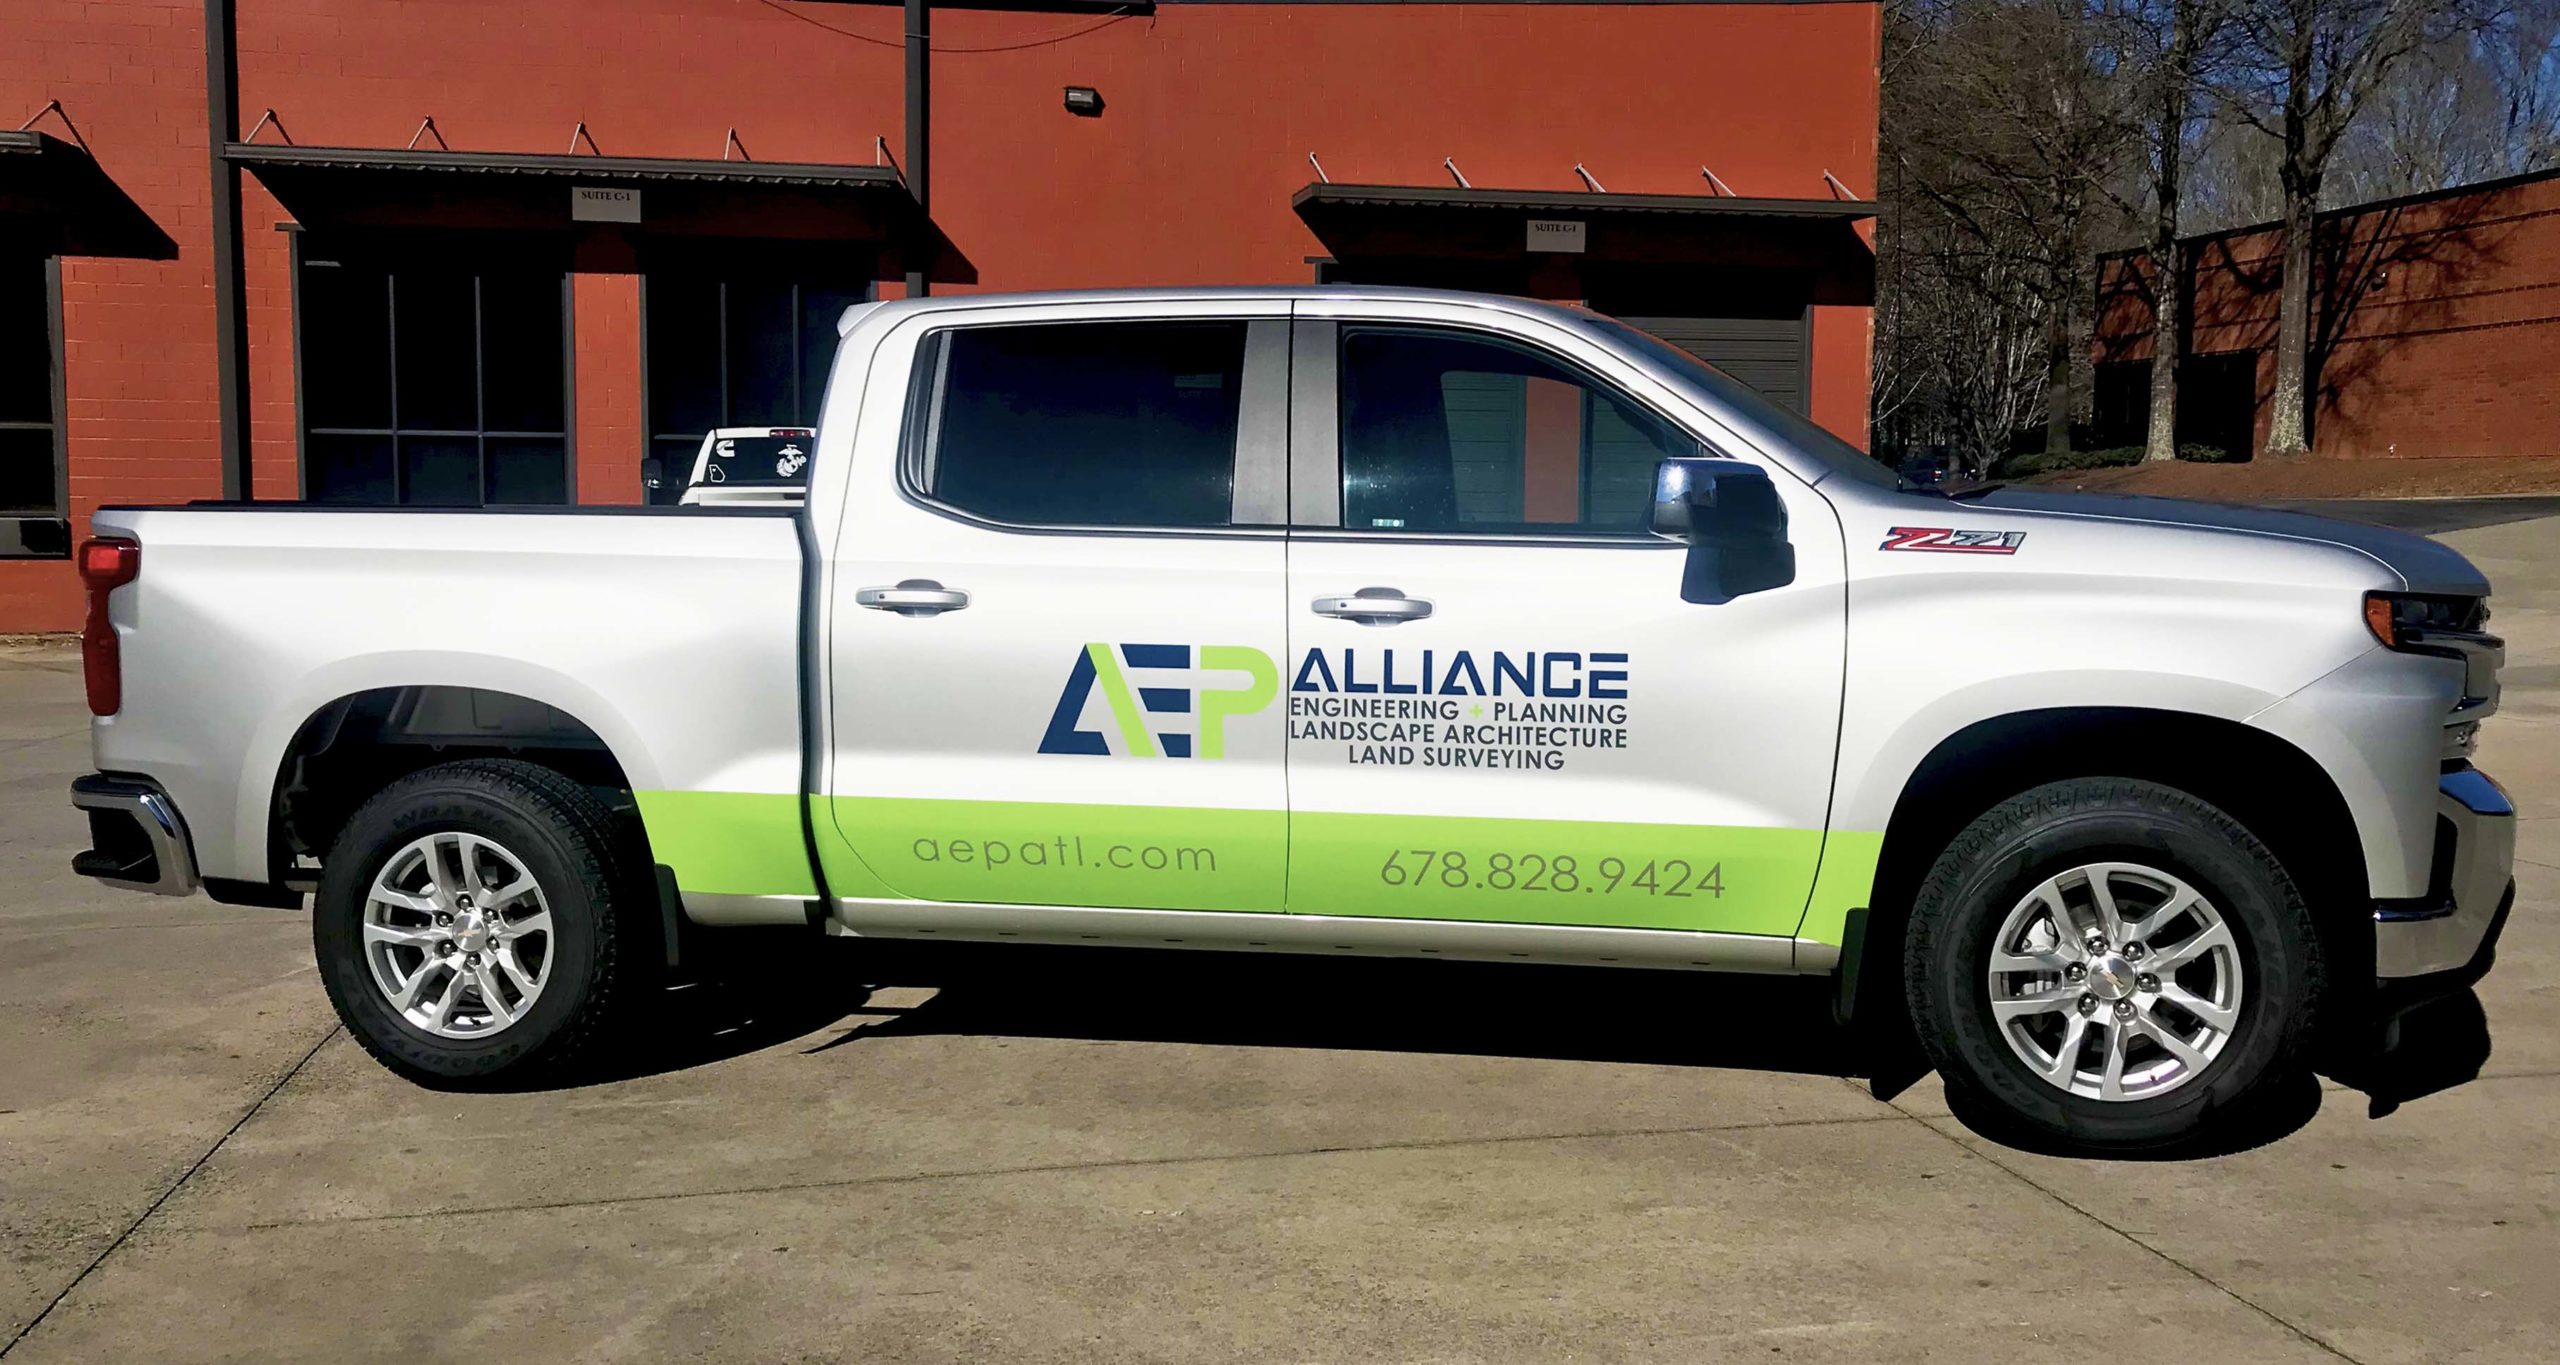 Silver pickup truck with vehicle decal for AEP Alliance engineering and planning landscape architecture land surveying